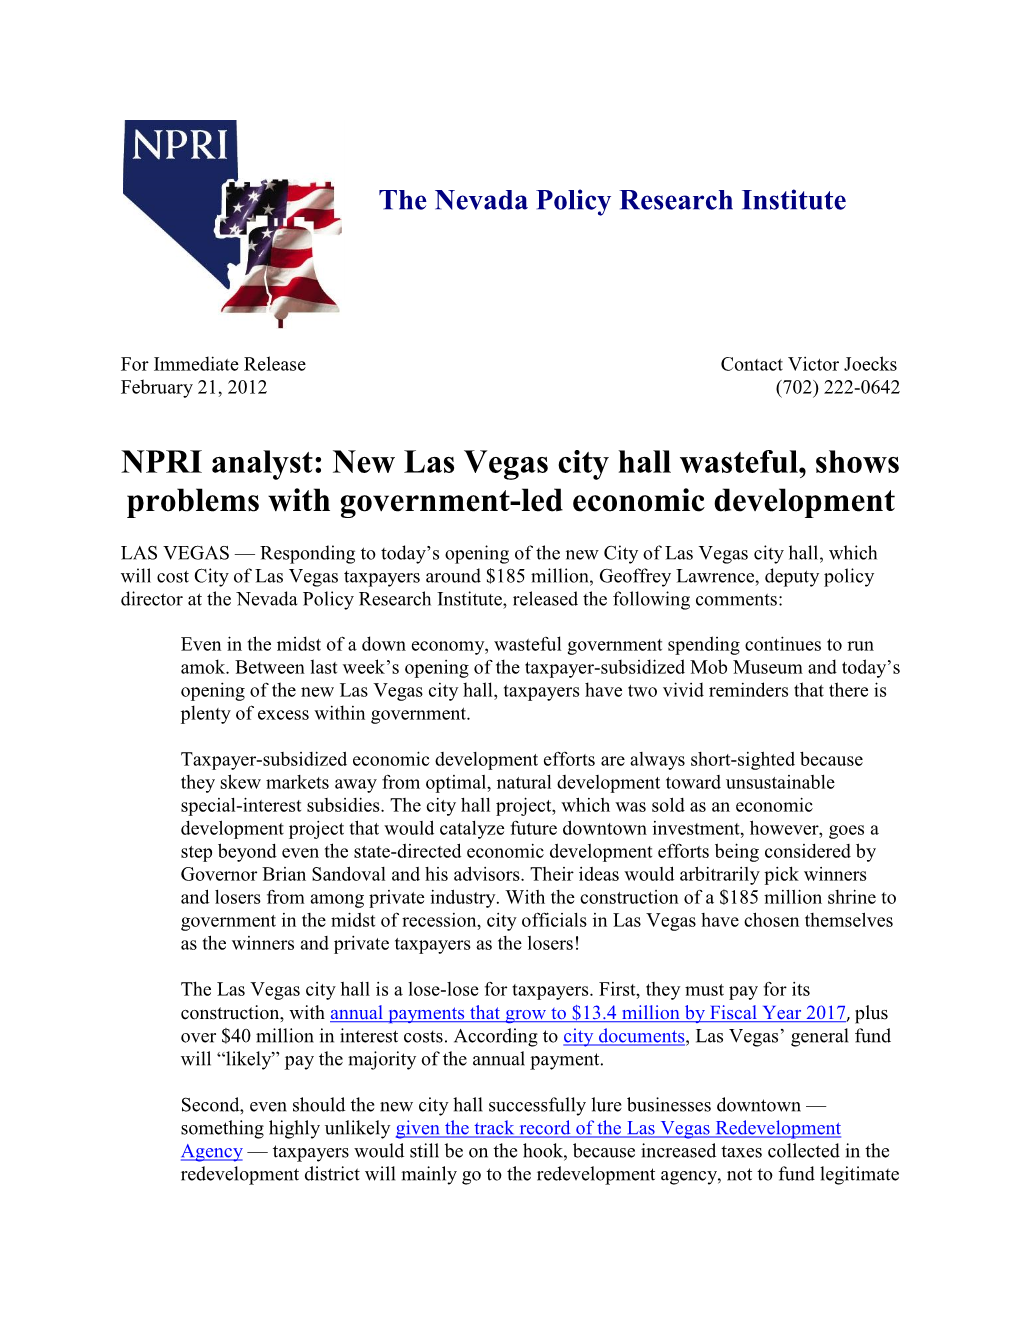 NPRI Analyst: New Las Vegas City Hall Wasteful, Shows Problems with Government-Led Economic Development